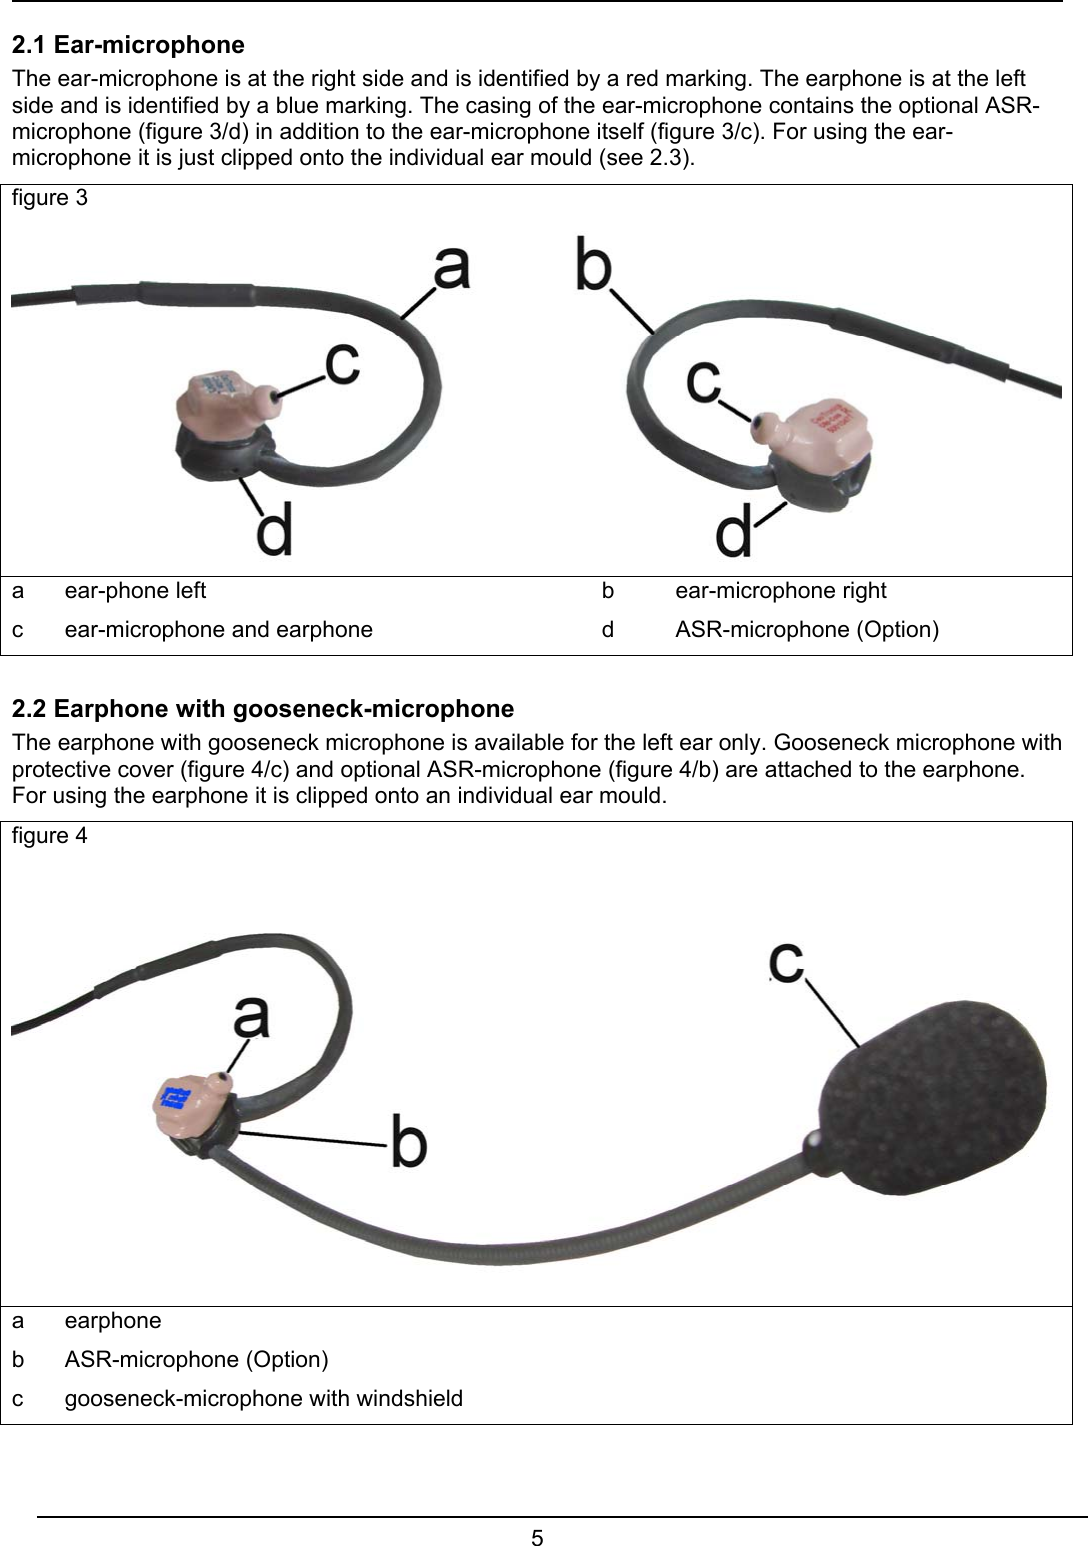  5  2.1 Ear-microphone The ear-microphone is at the right side and is identified by a red marking. The earphone is at the left side and is identified by a blue marking. The casing of the ear-microphone contains the optional ASR-microphone (figure 3/d) in addition to the ear-microphone itself (figure 3/c). For using the ear-microphone it is just clipped onto the individual ear mould (see 2.3). figure 3         a ear-phone left      b ear-microphone right c ear-microphone and earphone    d ASR-microphone (Option)  2.2 Earphone with gooseneck-microphone The earphone with gooseneck microphone is available for the left ear only. Gooseneck microphone with protective cover (figure 4/c) and optional ASR-microphone (figure 4/b) are attached to the earphone. For using the earphone it is clipped onto an individual ear mould. figure 4        a earphone     b ASR-microphone (Option) c  gooseneck-microphone with windshield  